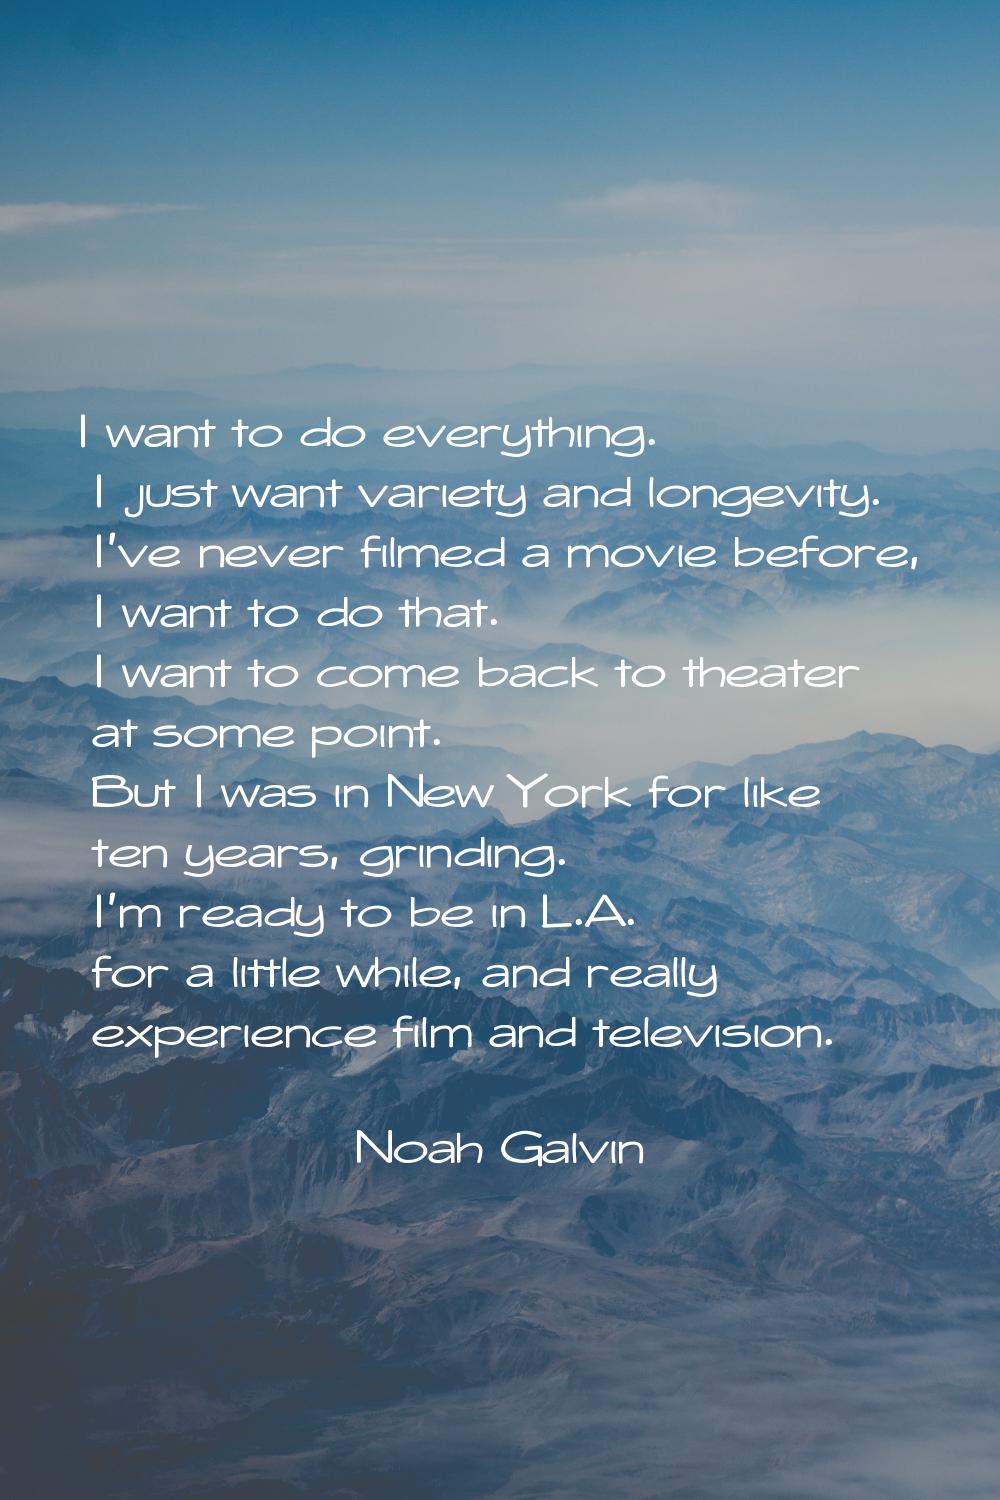 I want to do everything. I just want variety and longevity. I've never filmed a movie before, I wan